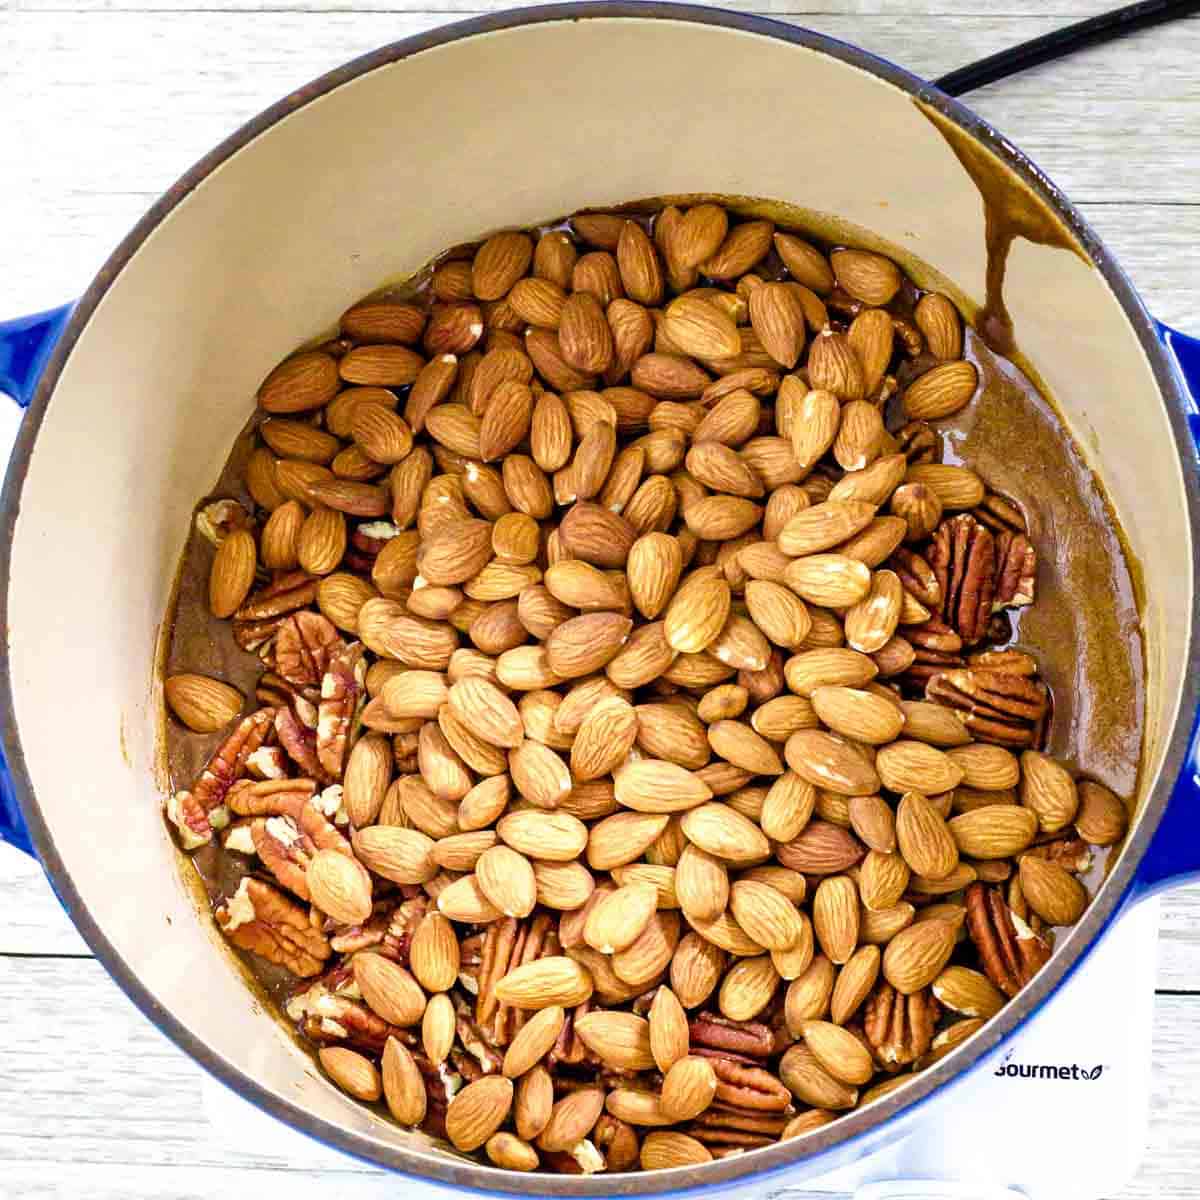 raw almonds and pecans added to the pot.